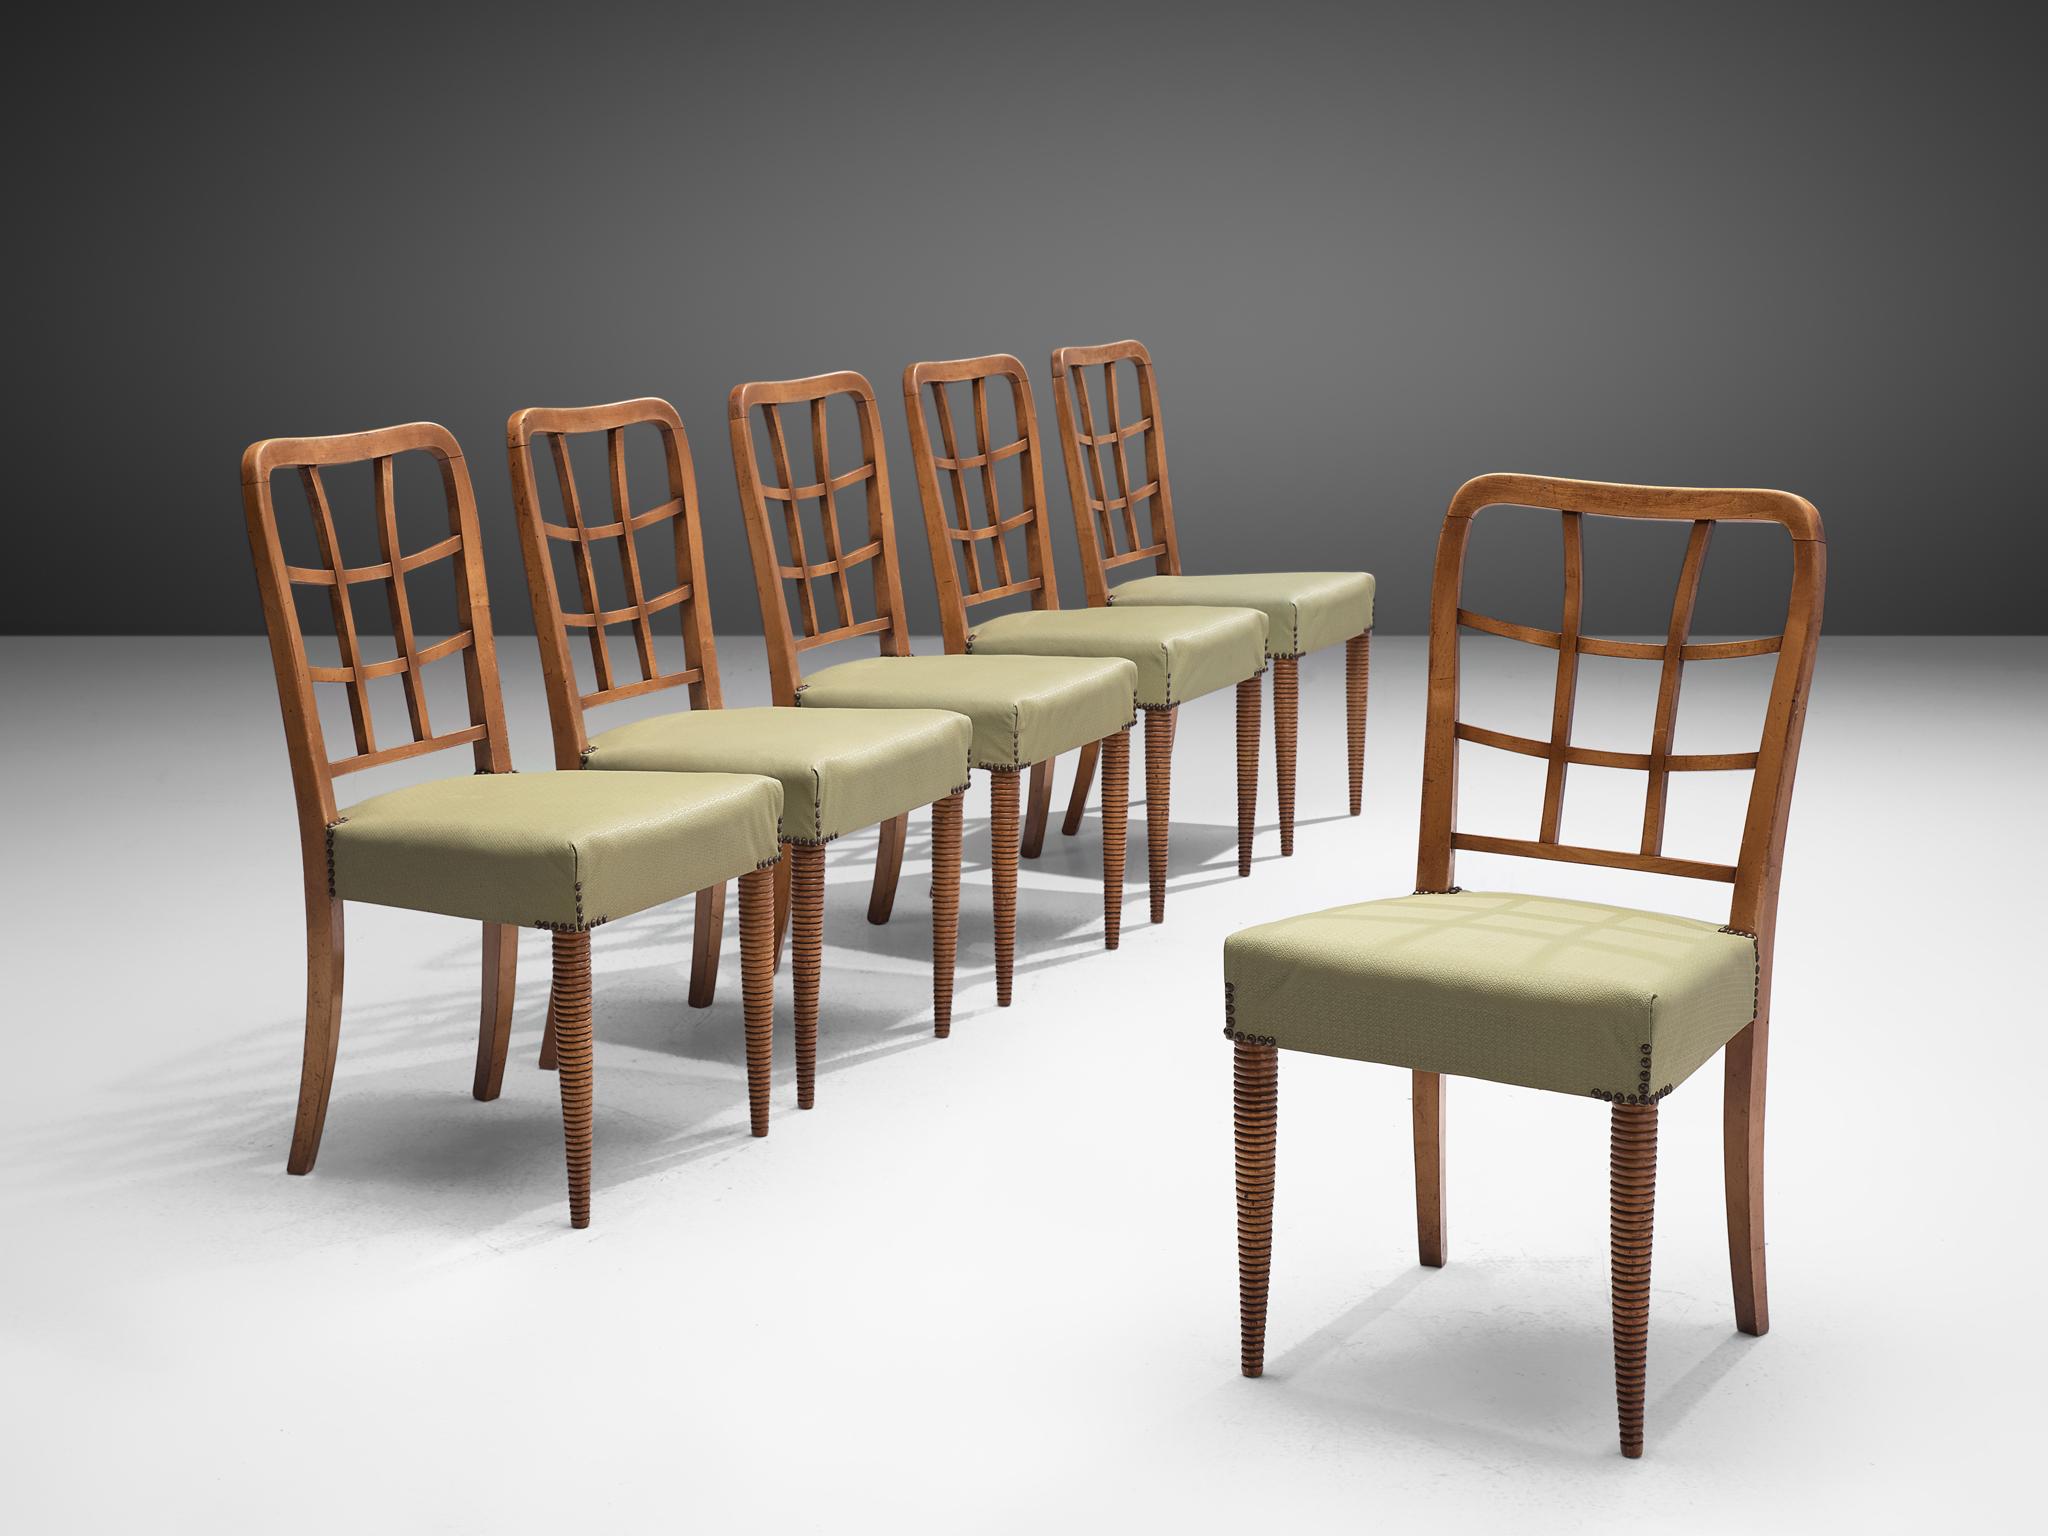 Set of 6 dining chairs, beech and leatherette, Italy, 1950s

This set of dining chairs is both sculptural and well-constructed. The elegant back shows an open frame with a grid that follows the tapered lines of the backrest. The front legs have a